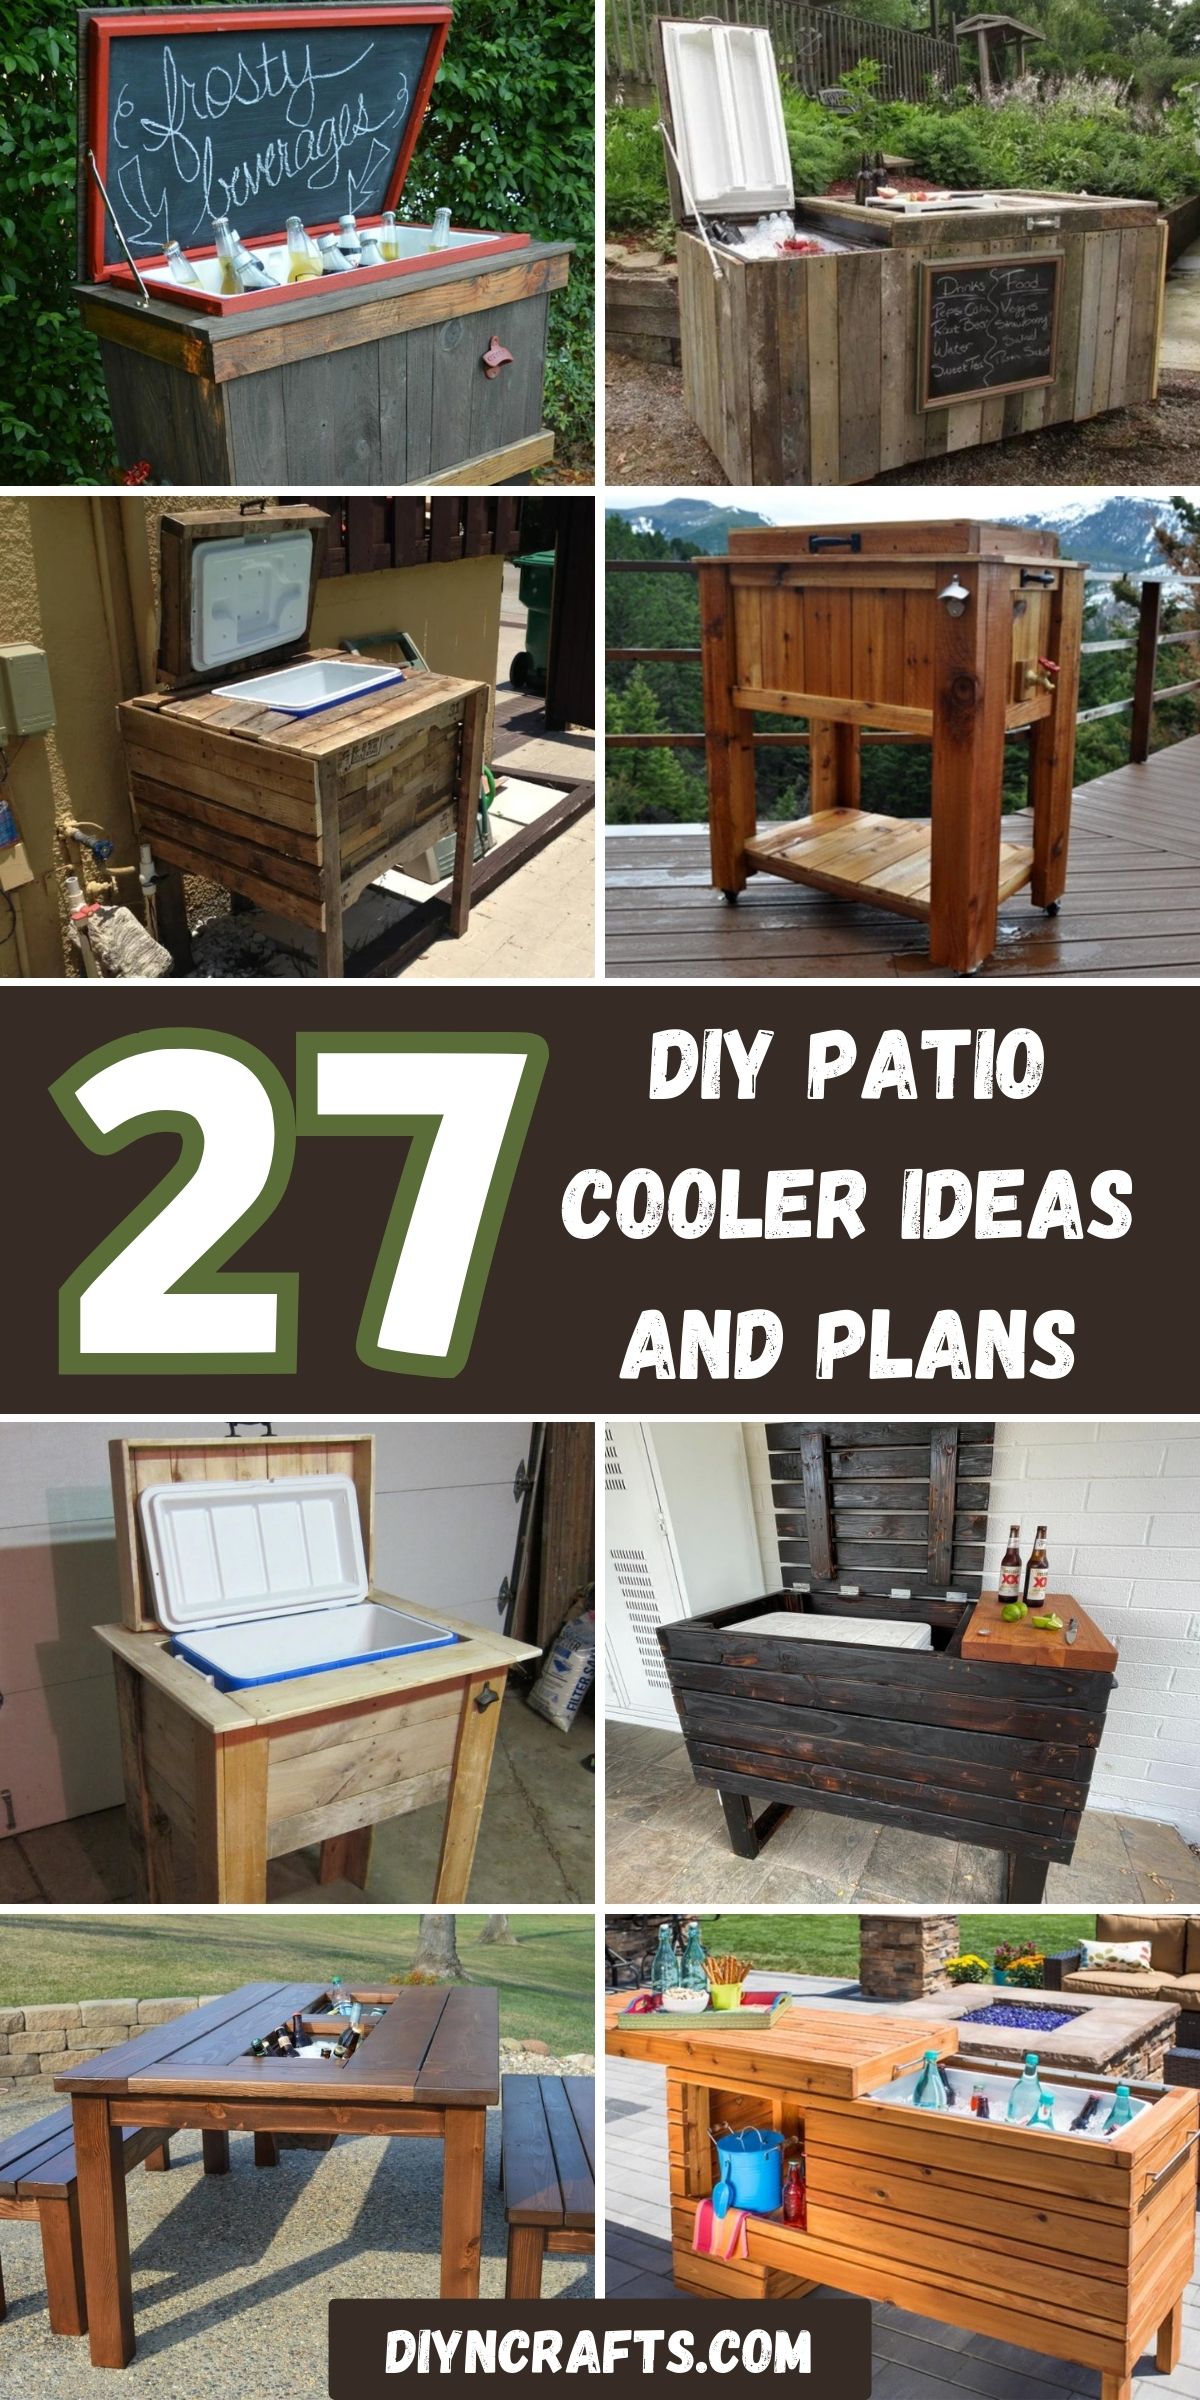 27 DIY Patio Cooler Ideas and Plans collage.